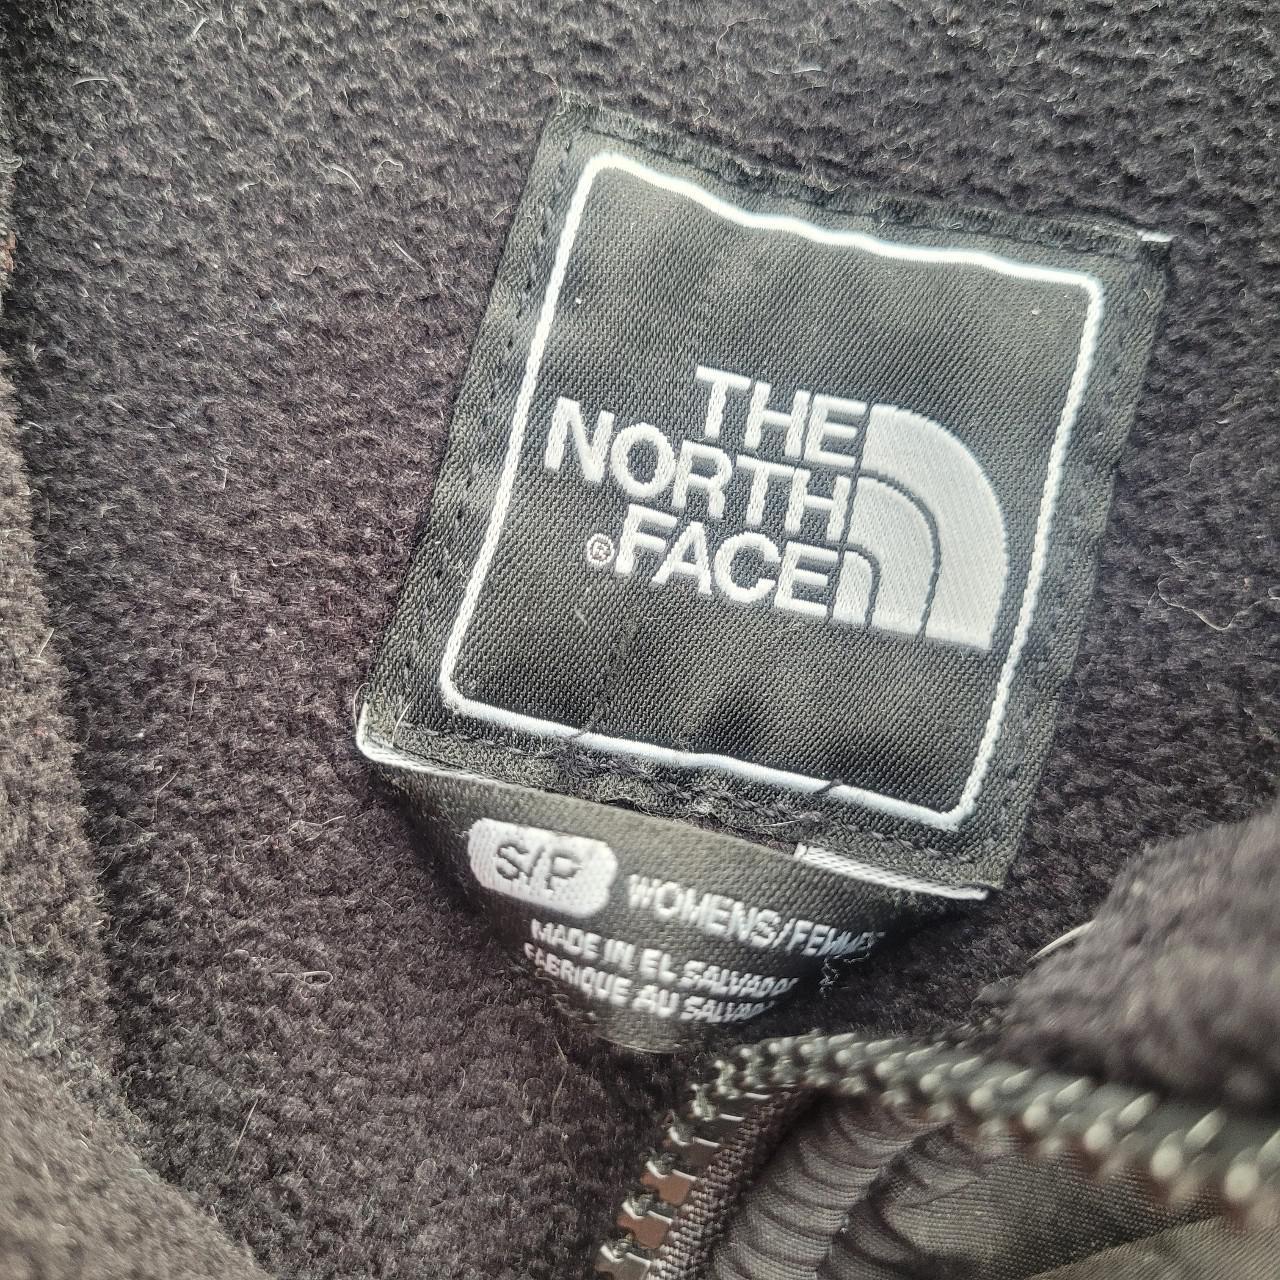 Product Image 3 - The North Face Denali Fleece